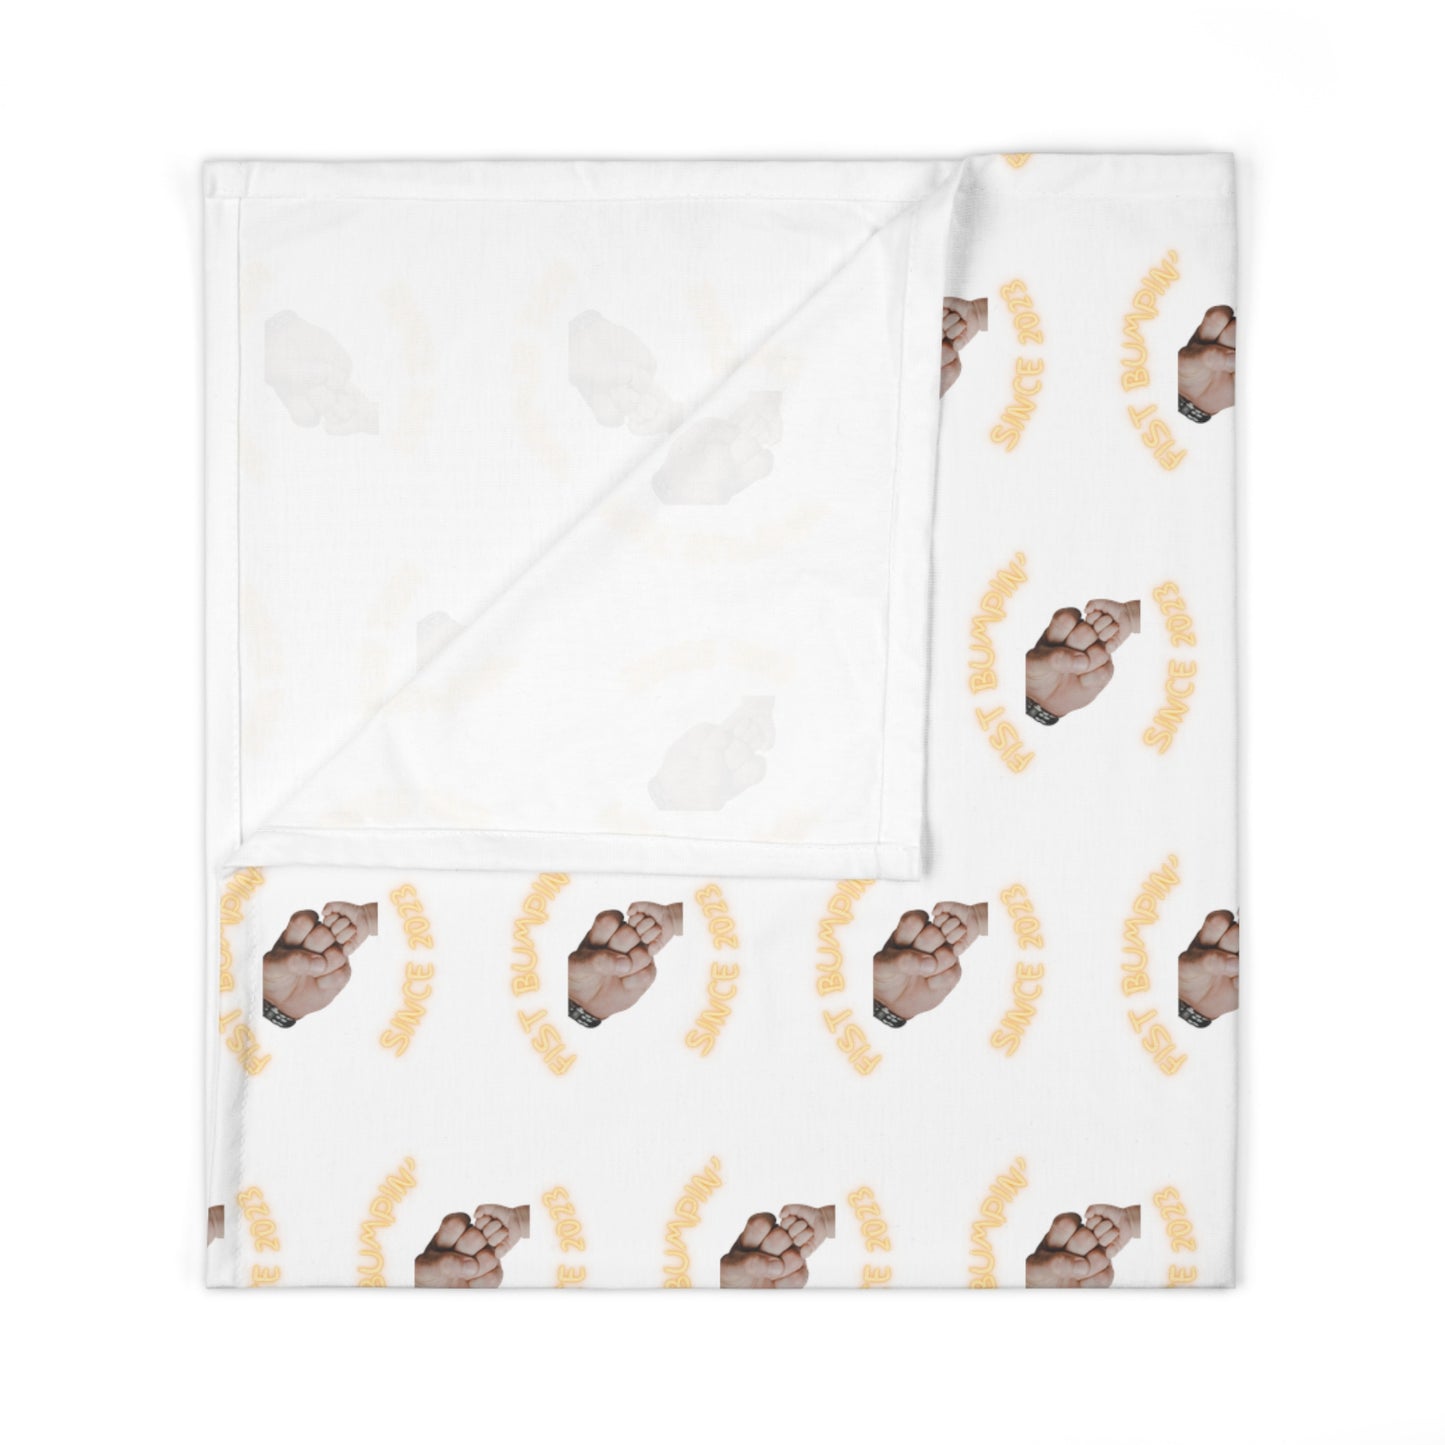 Kansas City Gold on White Fist Bumpin’ Since 2023 Baby Swaddle Blanket